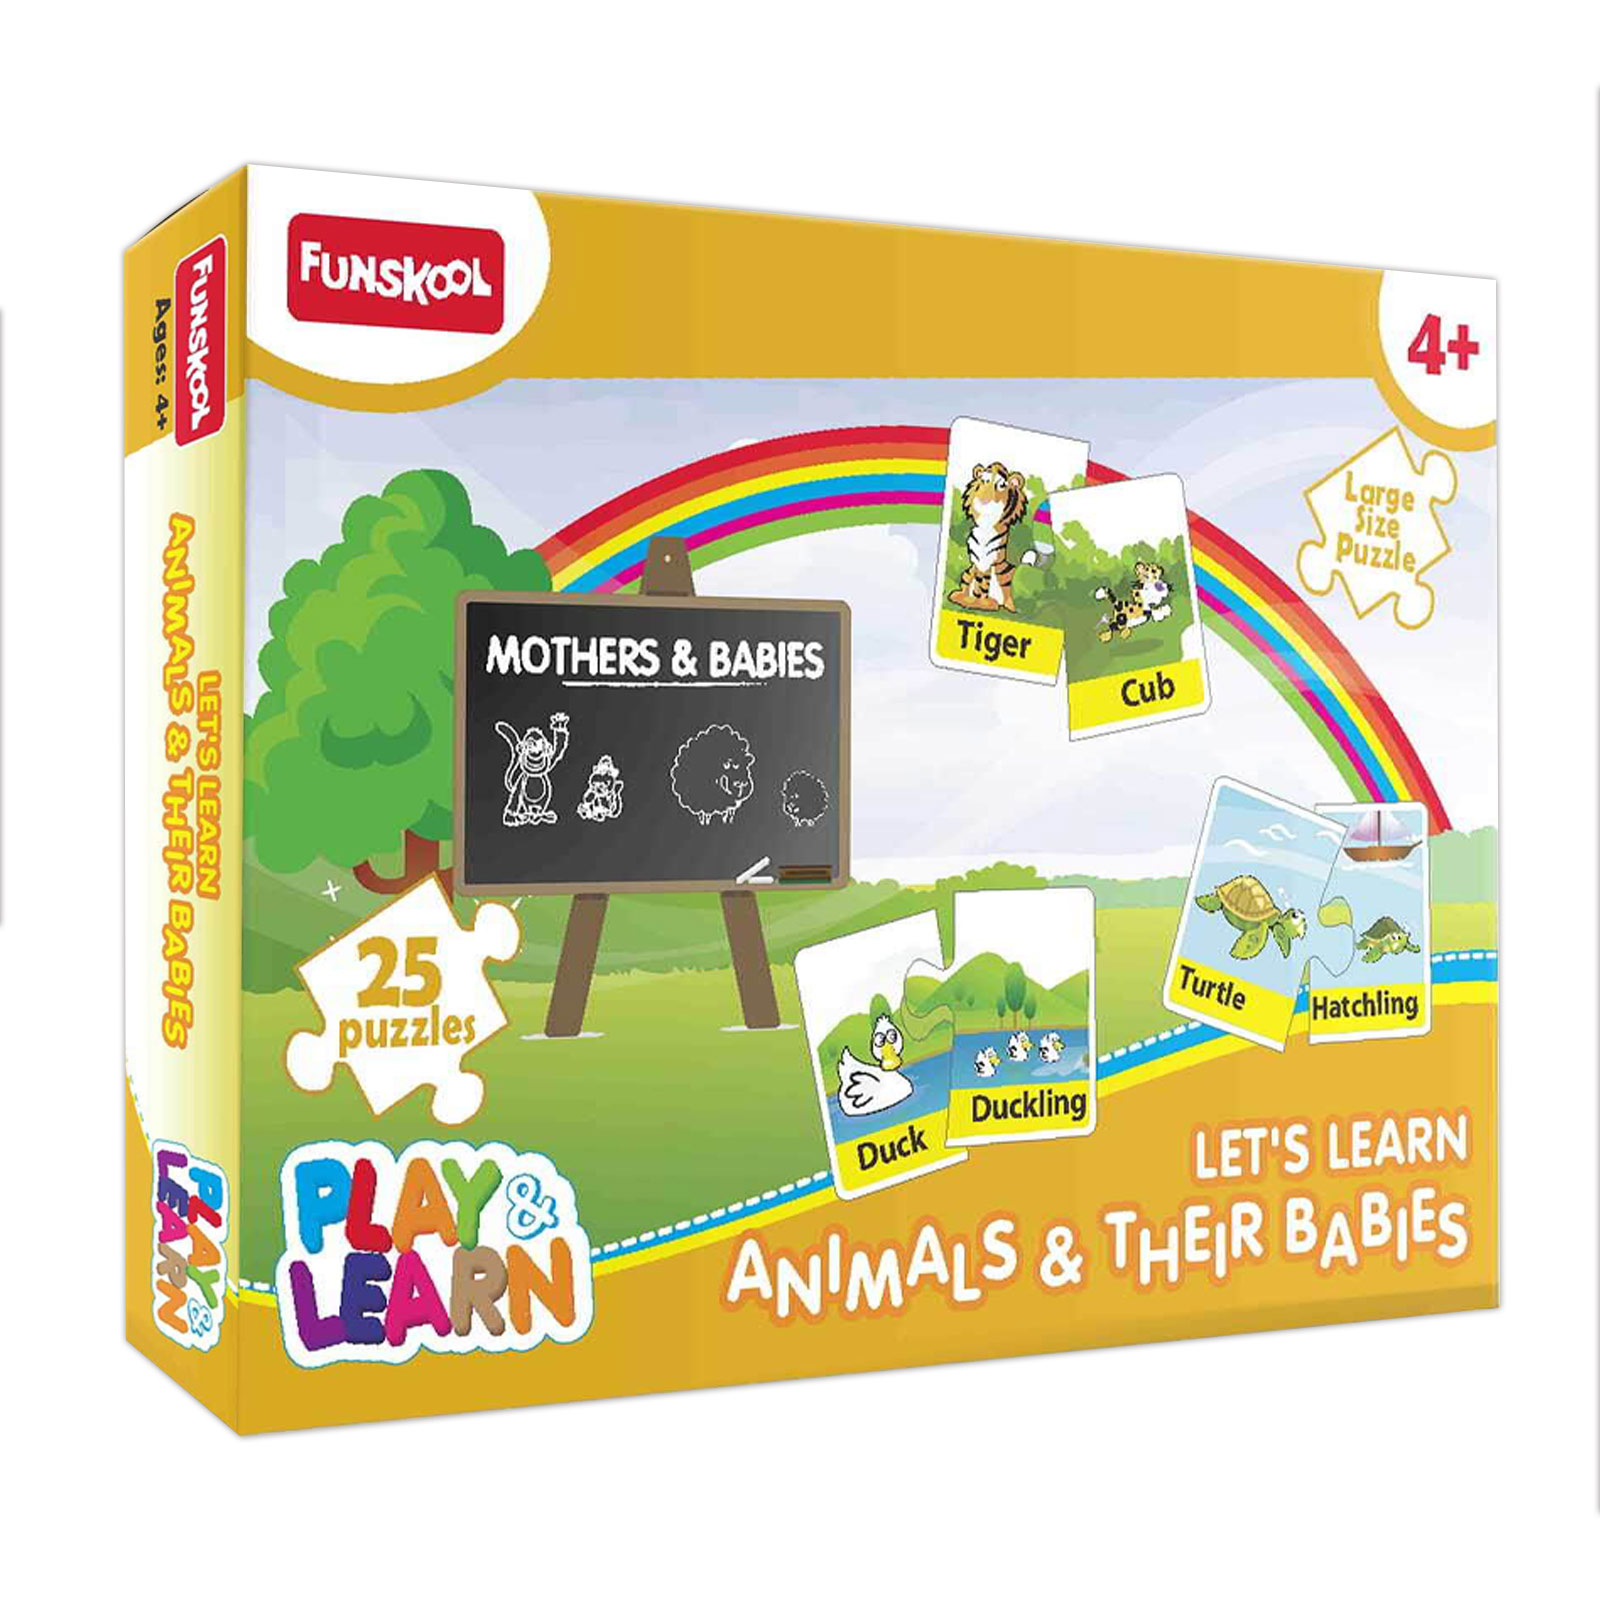 Details about   Funskool Toys Play & Learn Animals Large Size Puzzle Game 16 Pcs Puzzles 